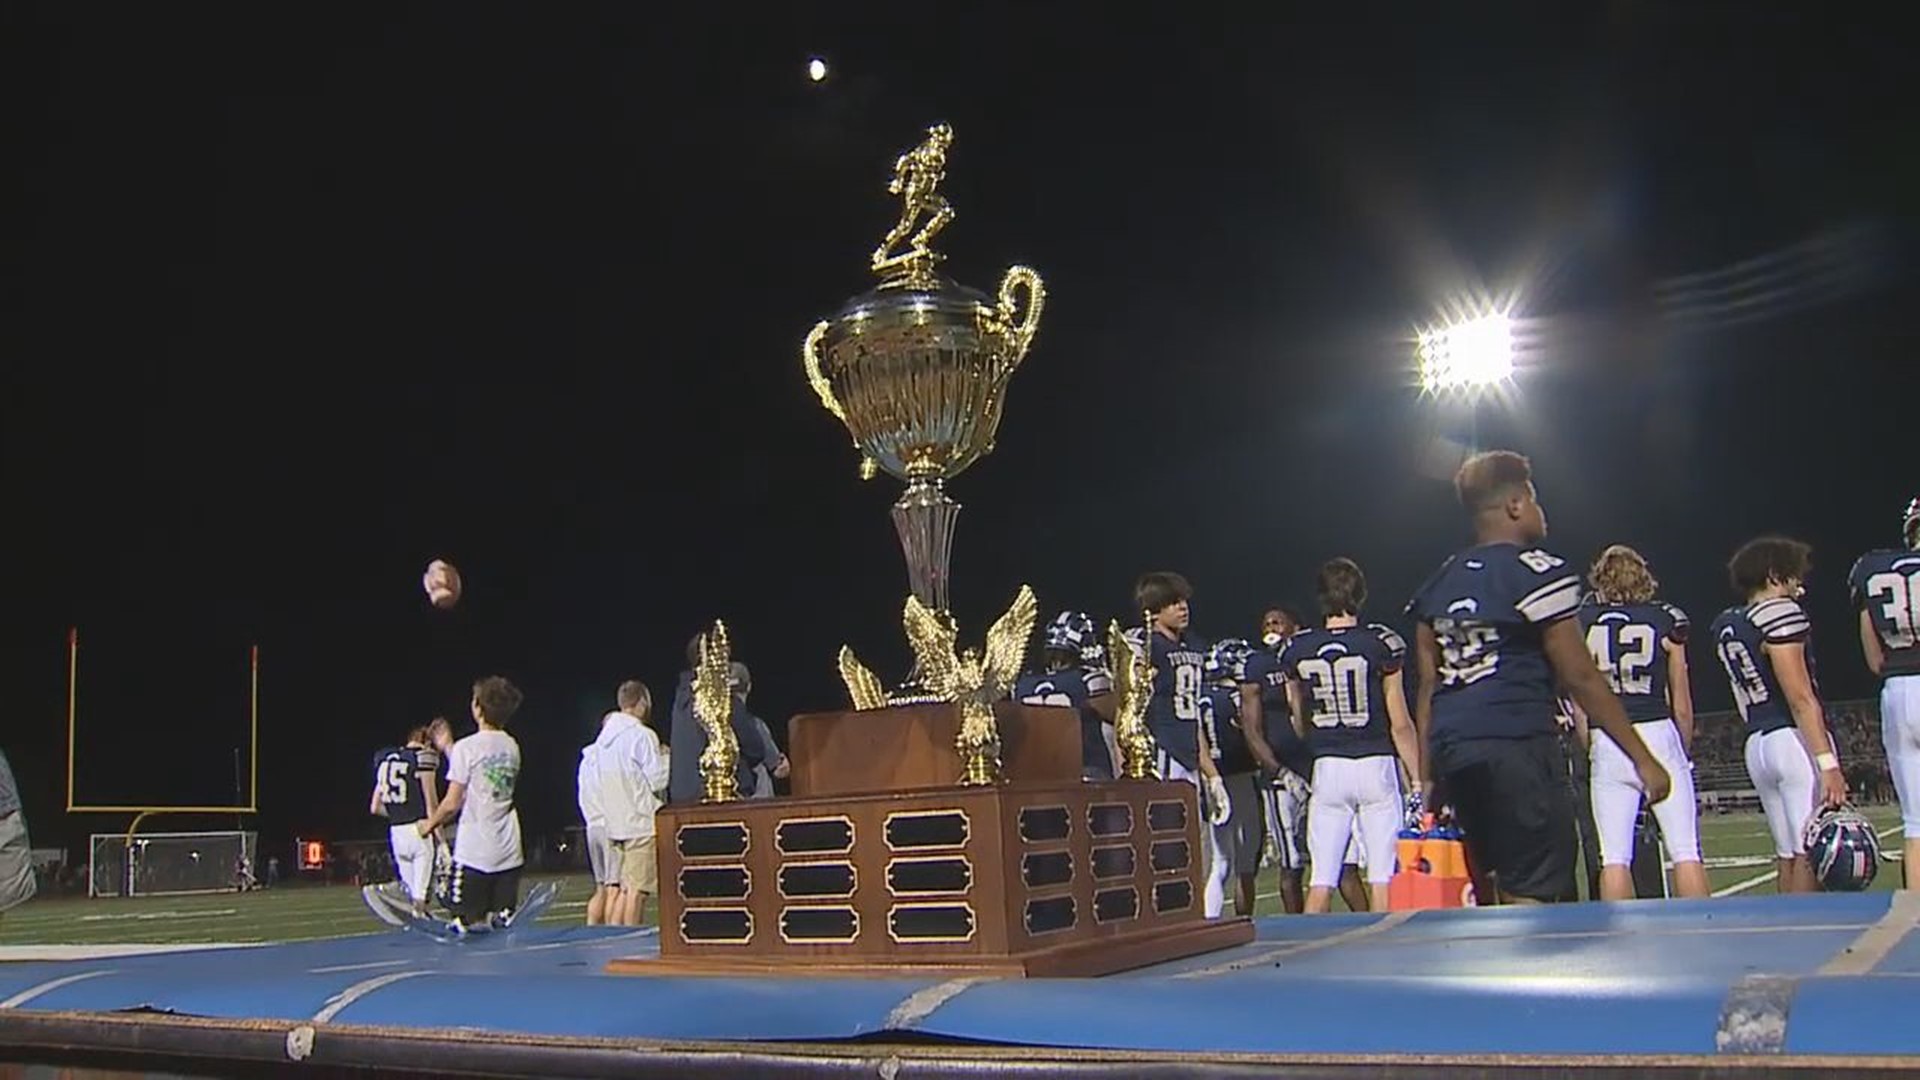 The Kurjiaka Trophy is heading to Hempfield for the first time since 2013.